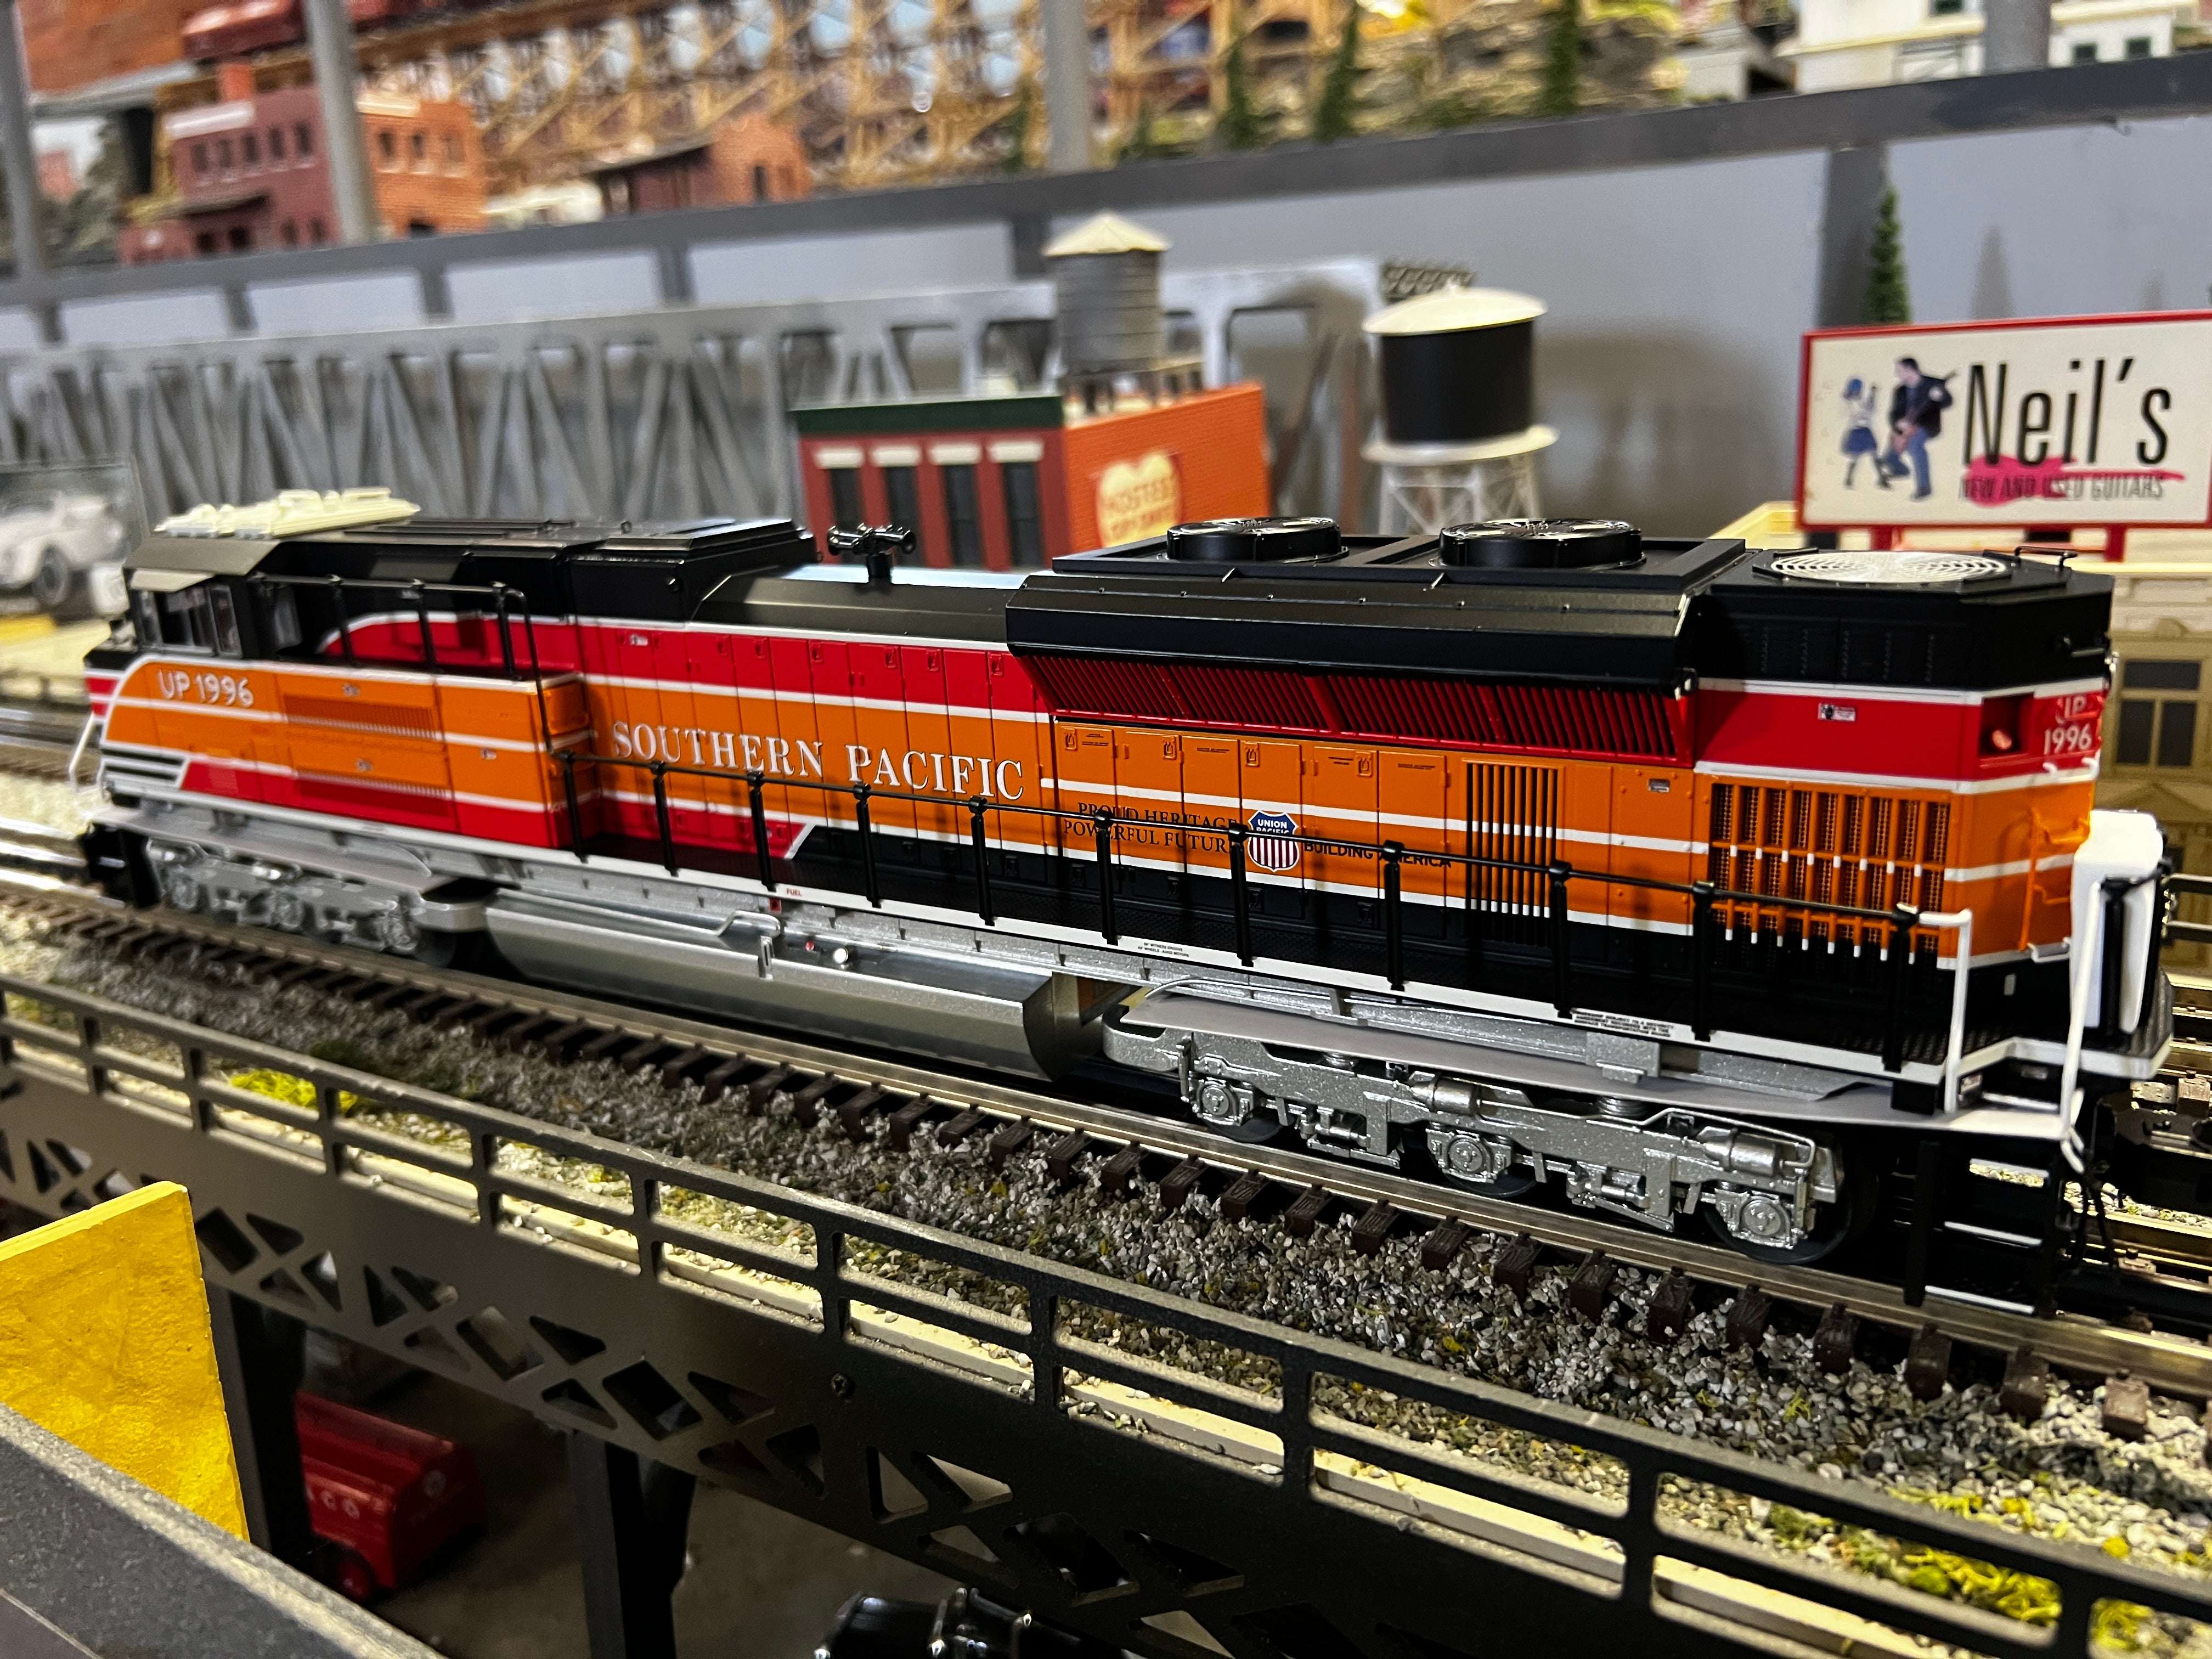 Lionel 2333230 - Legacy SD70ACE Diesel Locomotive "Southern Pacific" #1996 (Union Pacific Heritage)